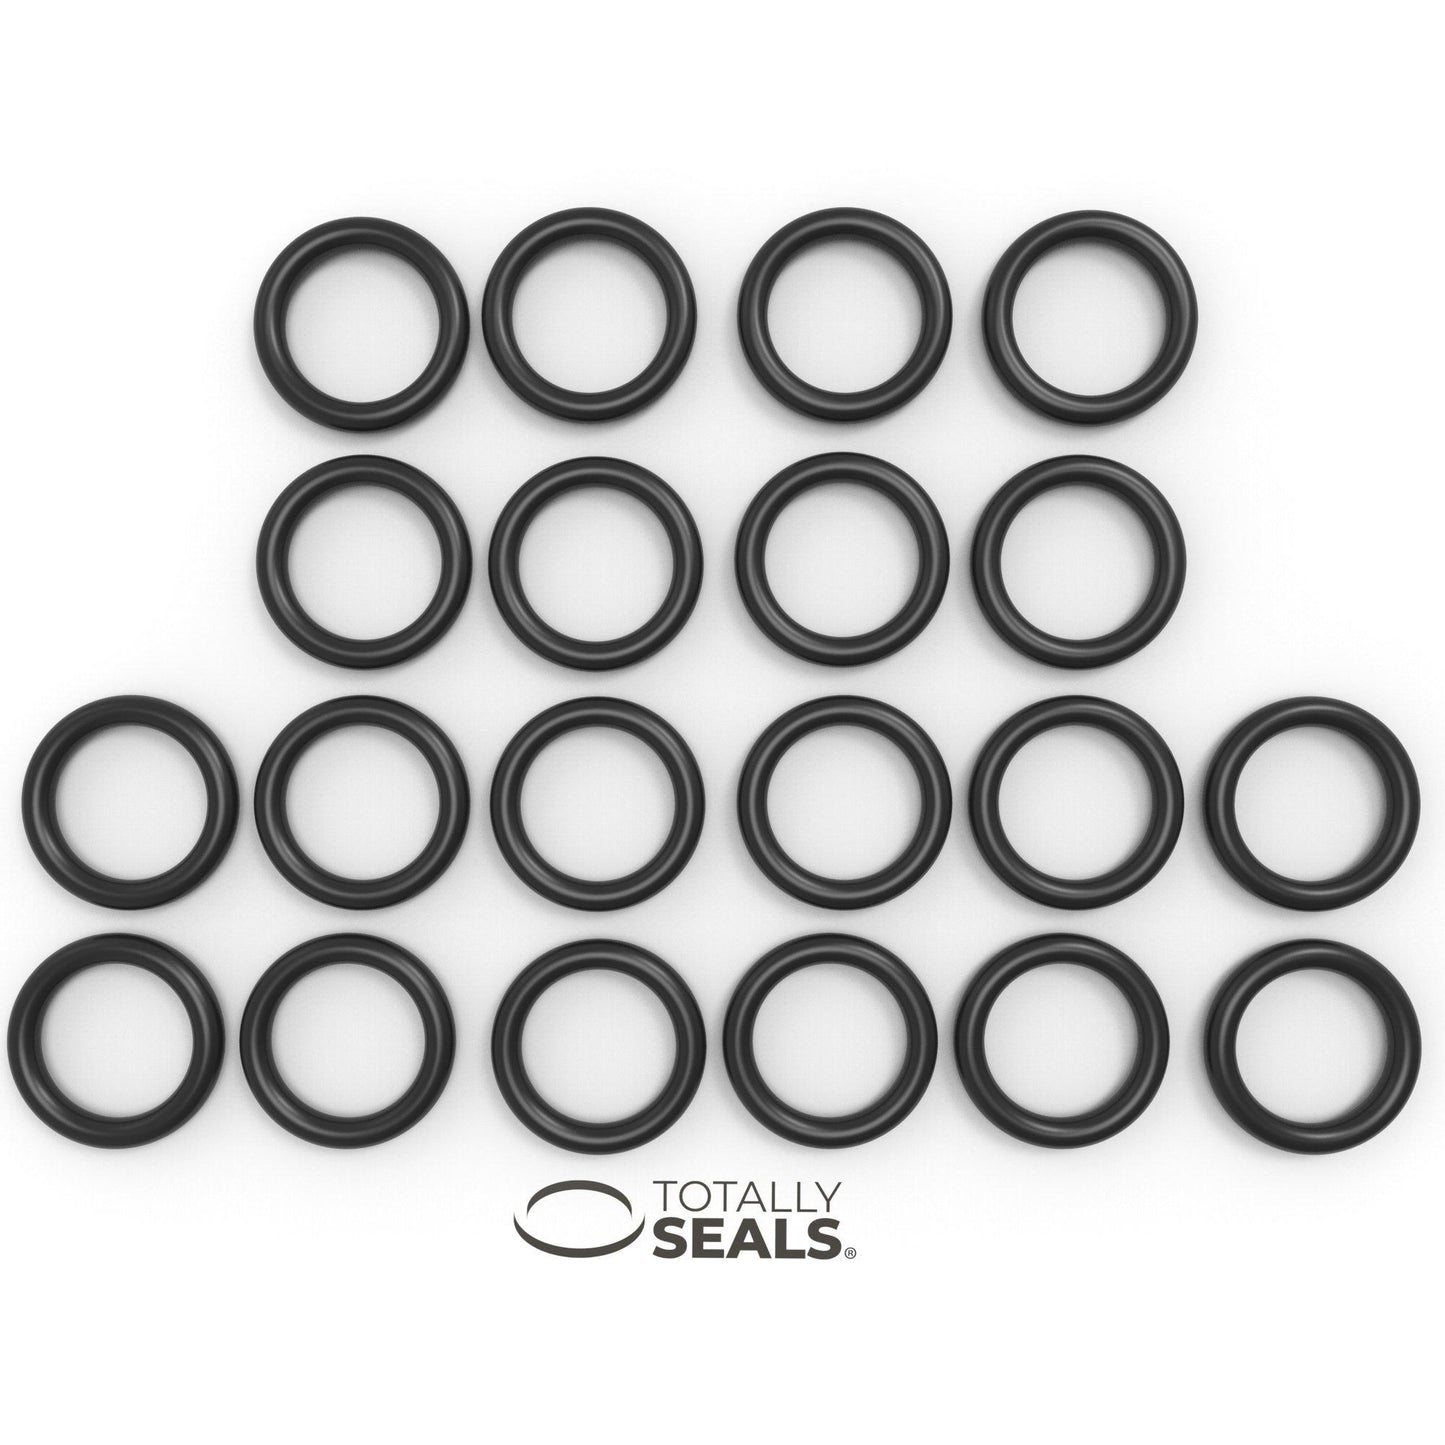 33mm x 2mm (37mm OD) Nitrile O-Rings - Totally Seals®